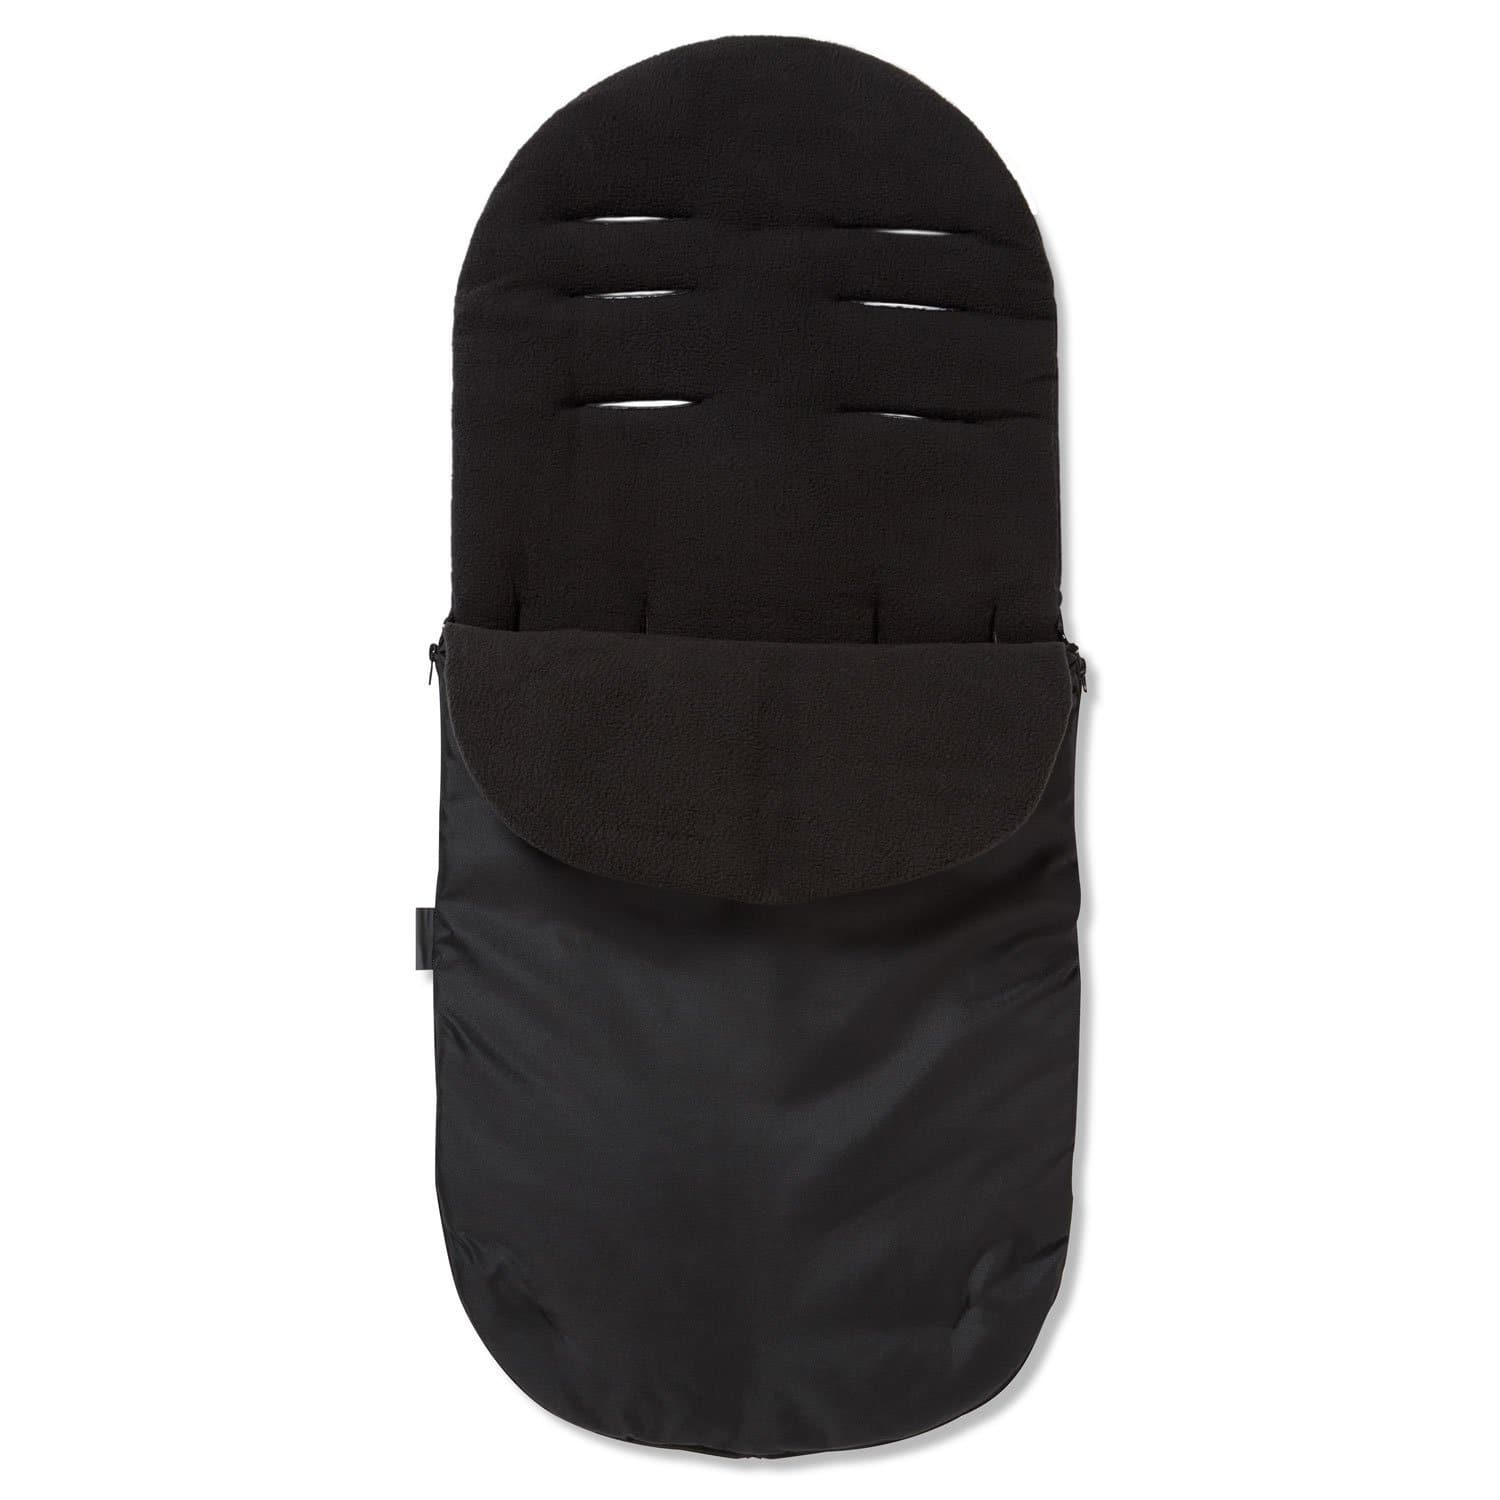 Footmuff / Cosy Toes Compatible with Orbit - Black / Fits All Models | For Your Little One